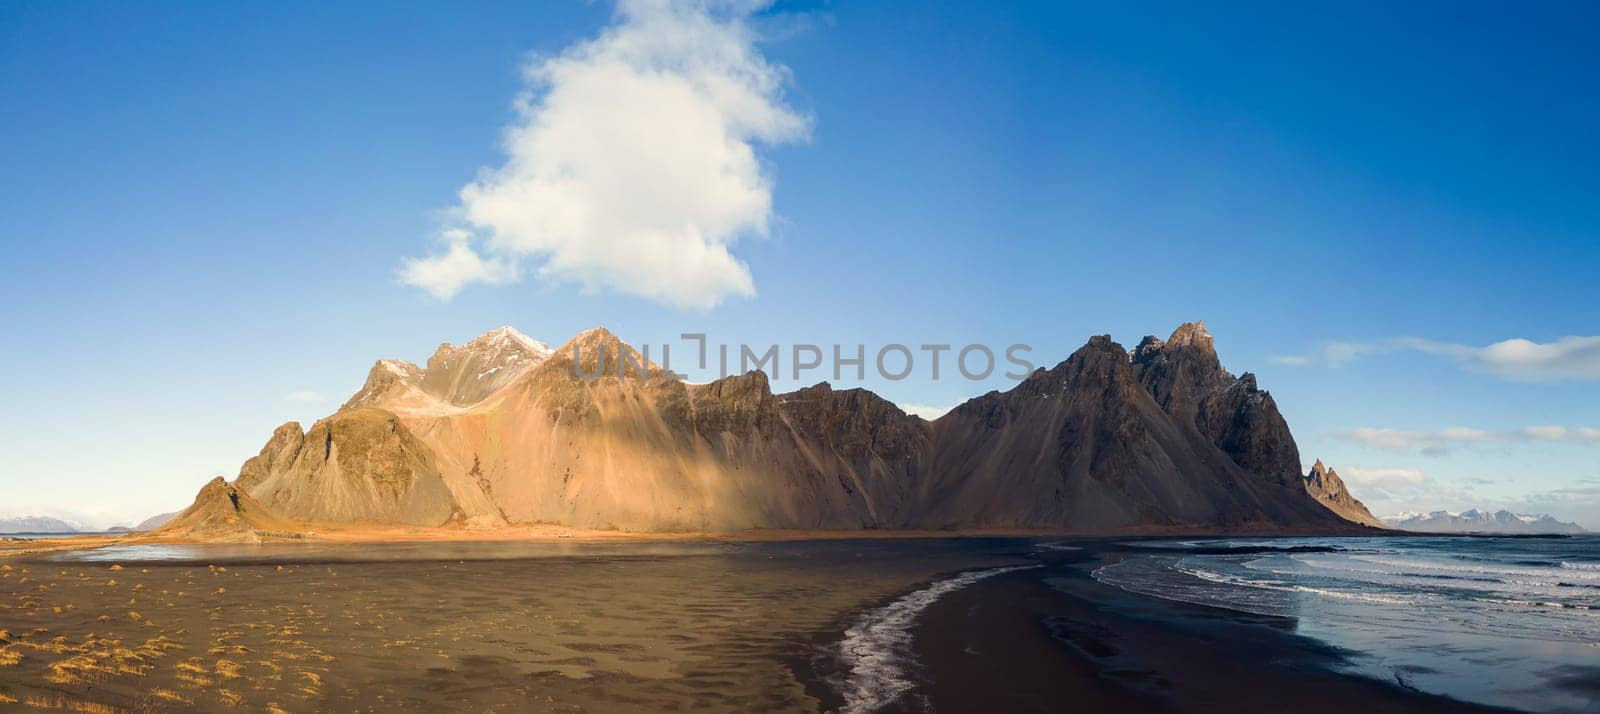 Panoramic view of vestrahorn rocky hills on icelandic peninsula, with unique black sand beach and nordic outdoor setting. Incredible landscape created by mountain top and ocean waves.